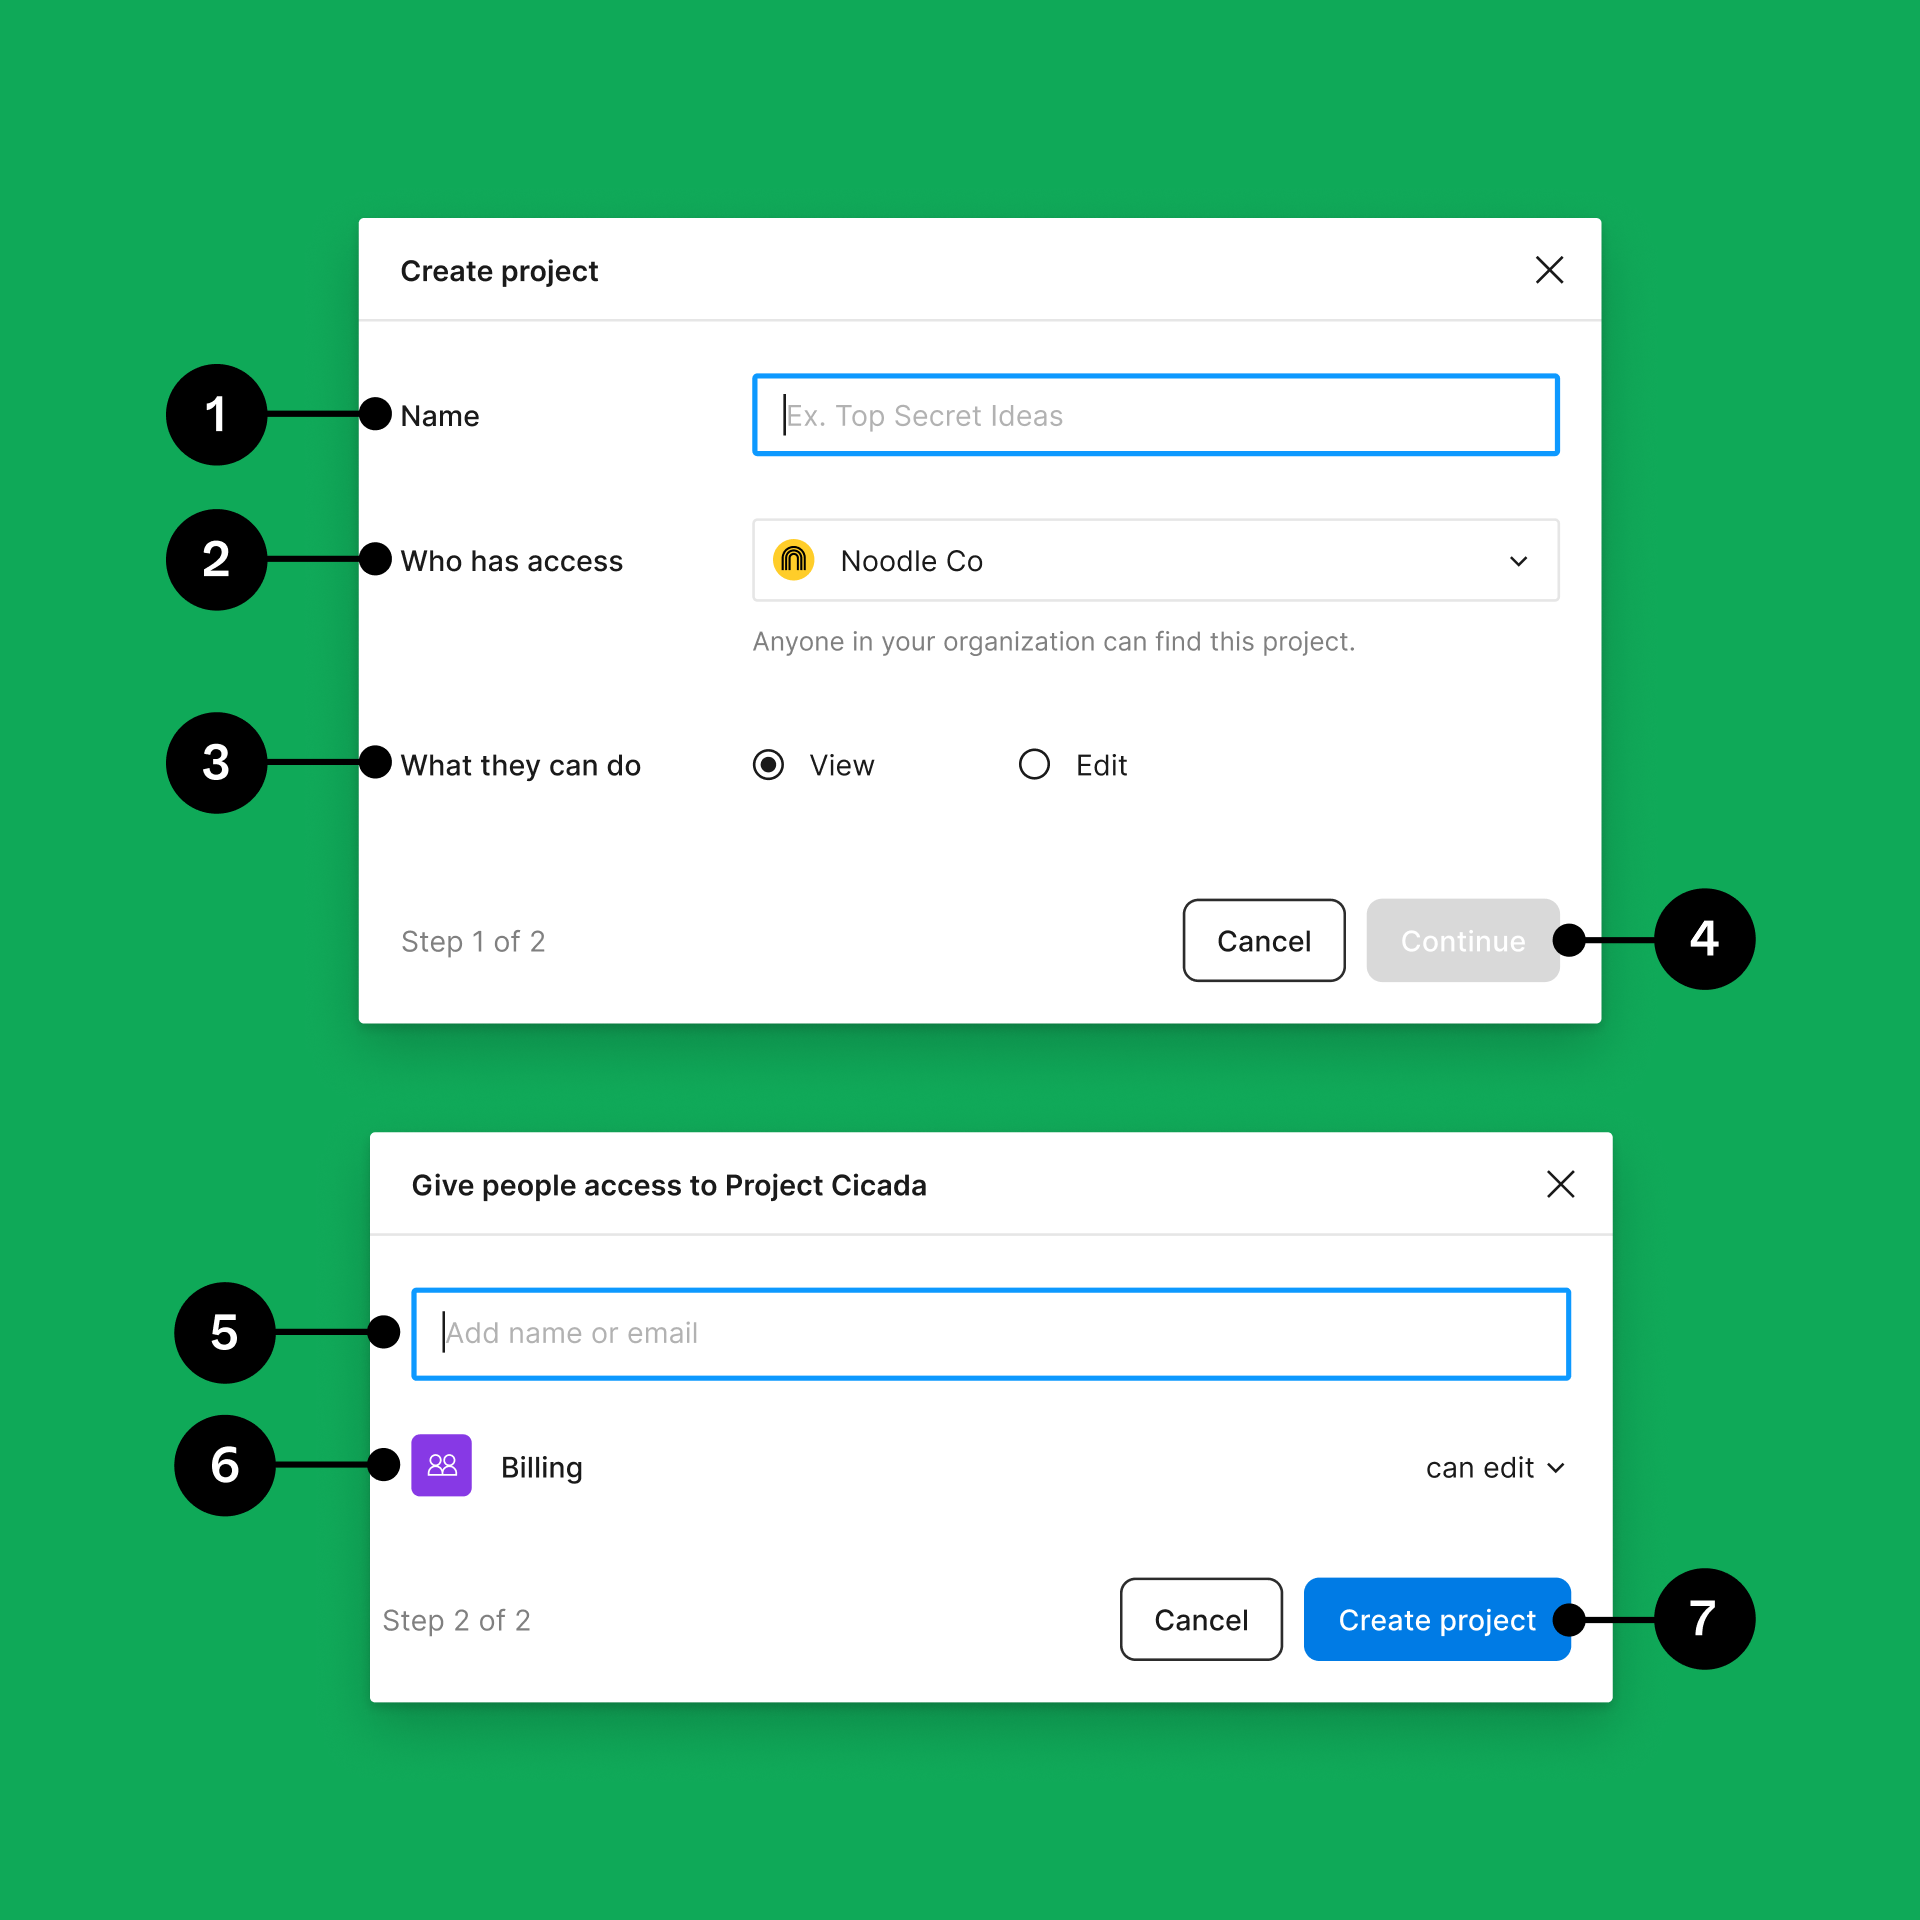 The Create project modal. Users cam enter a project name, set audience access, and set team-level access.